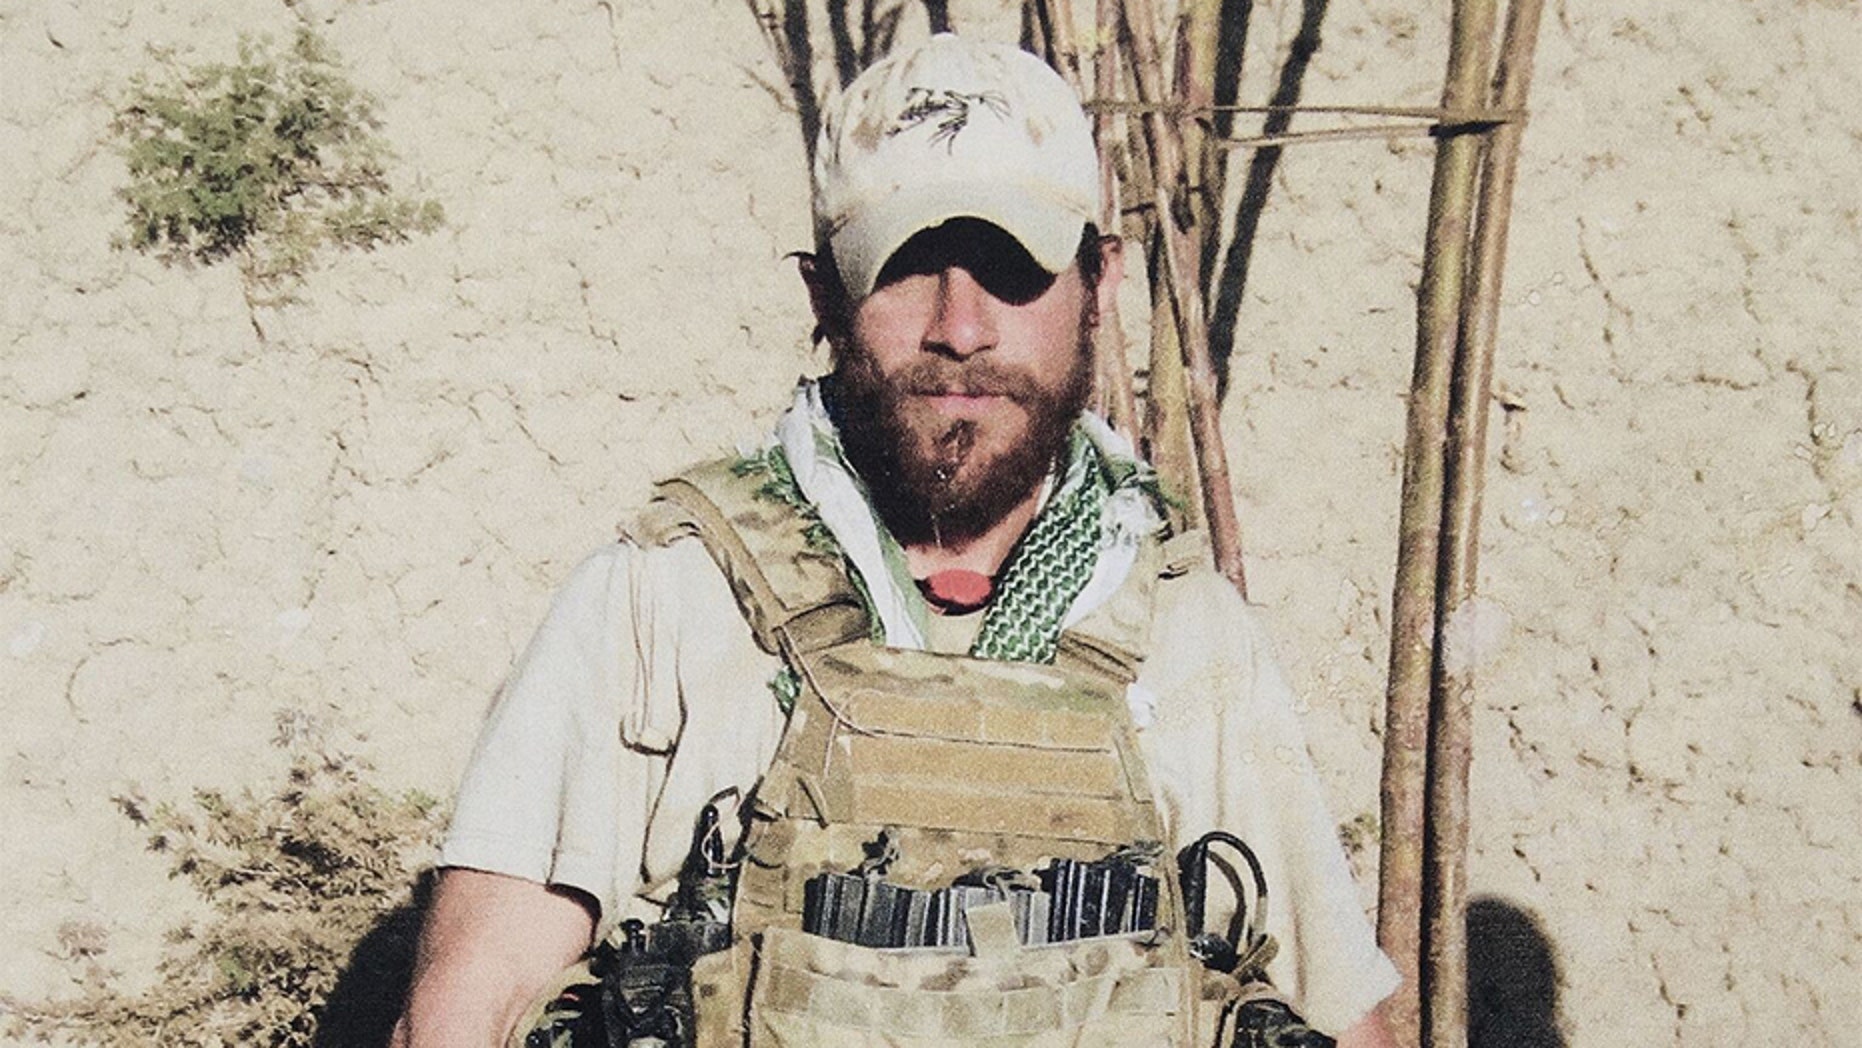 Judge drops 2 charges against decorated Navy SEAL Edward Gallagher